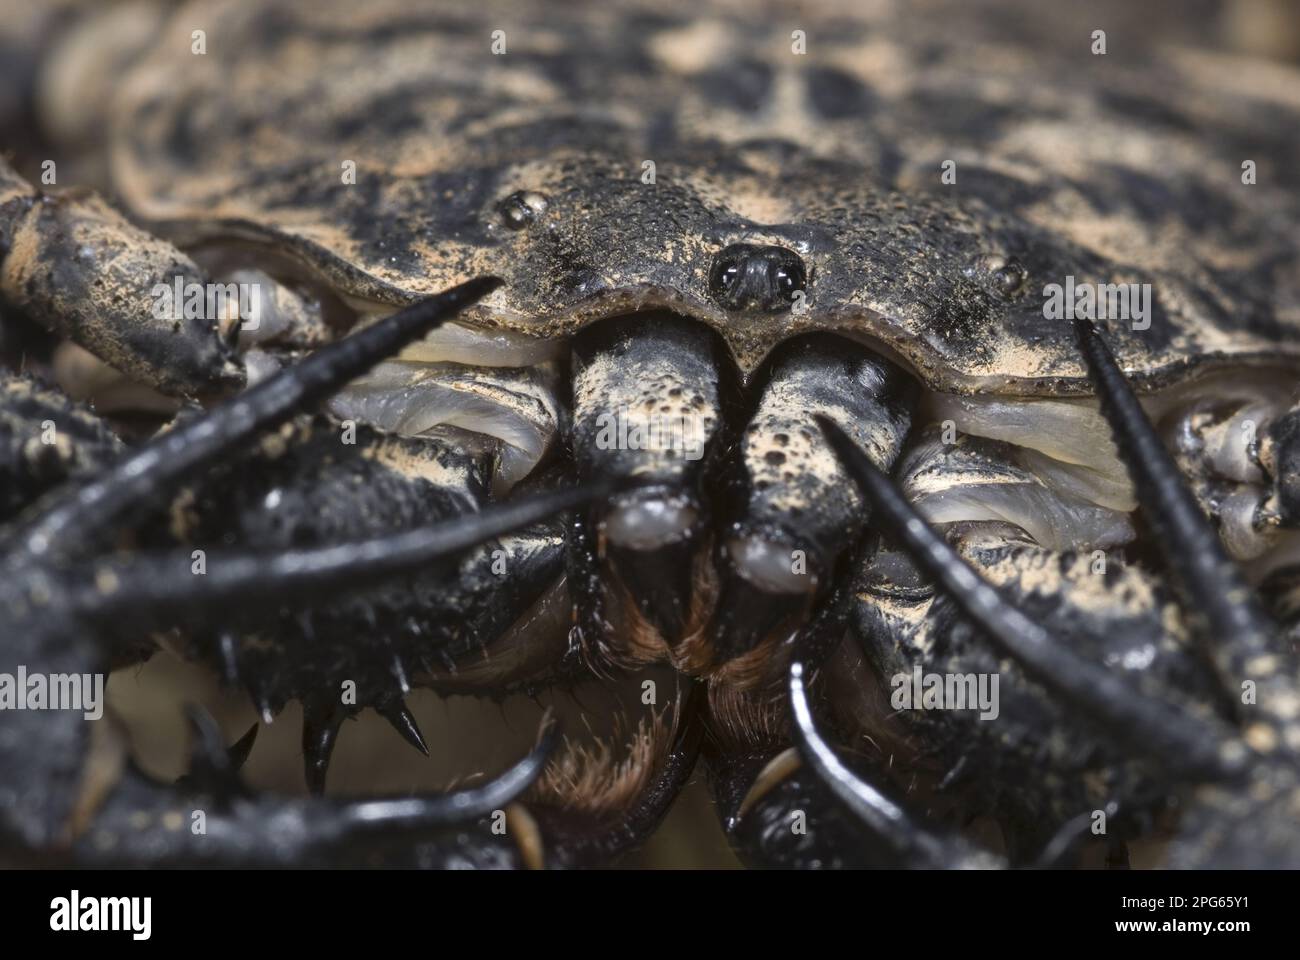 Variegated Tailless Whip whipscorpion (Damon variegatus), adult female, close-up of cephalothorax with eyes and mouth, Central Africa Stock Photo